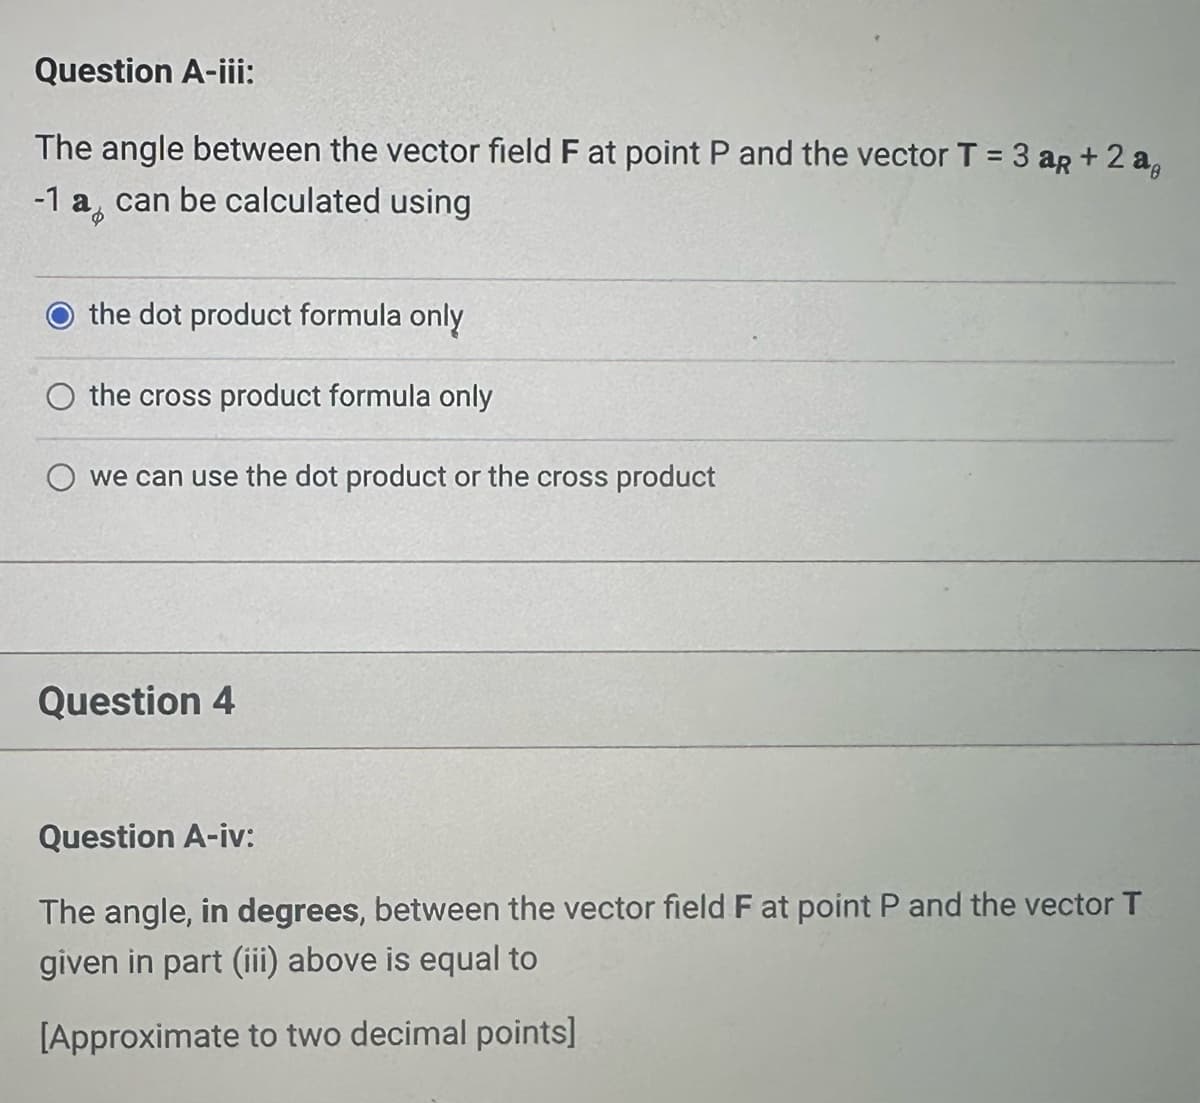 Question A-iii:
The angle between the vector field F at point P and the vector T = 3 aR + 2 ag
-1 a can be calculated using
the dot product formula only
O the cross product formula only
we can use the dot product or the cross product
Question 4
Question A-iv:
The angle, in degrees, between the vector field F at point P and the vector T
given in part (iii) above is equal to
[Approximate to two decimal points]